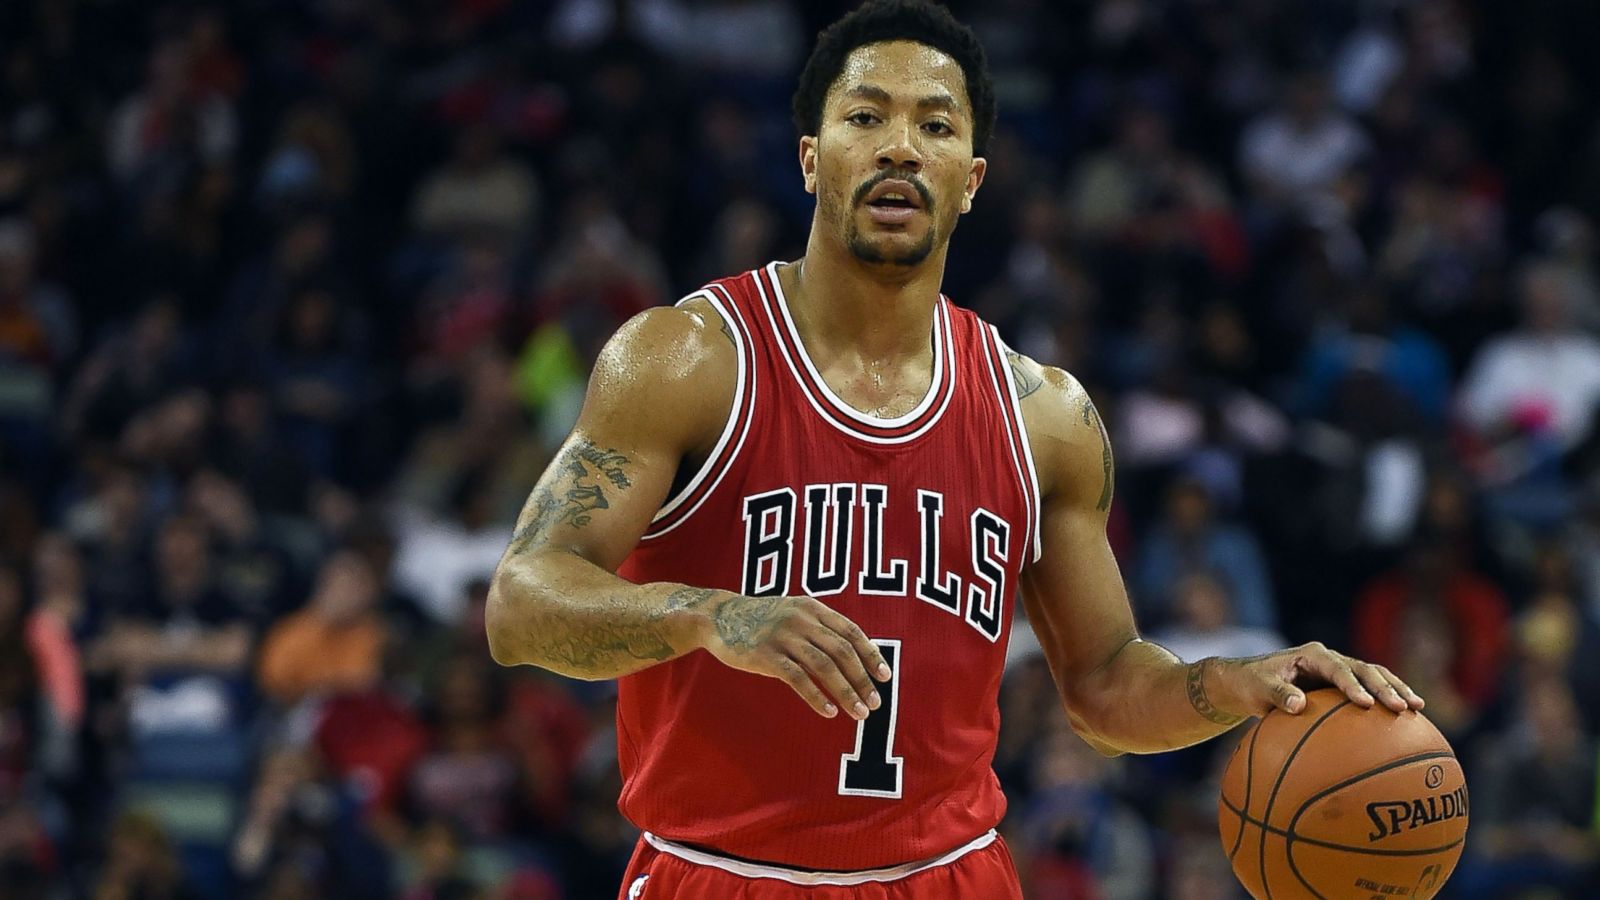 Derrick Rose suffers yet another knee injury